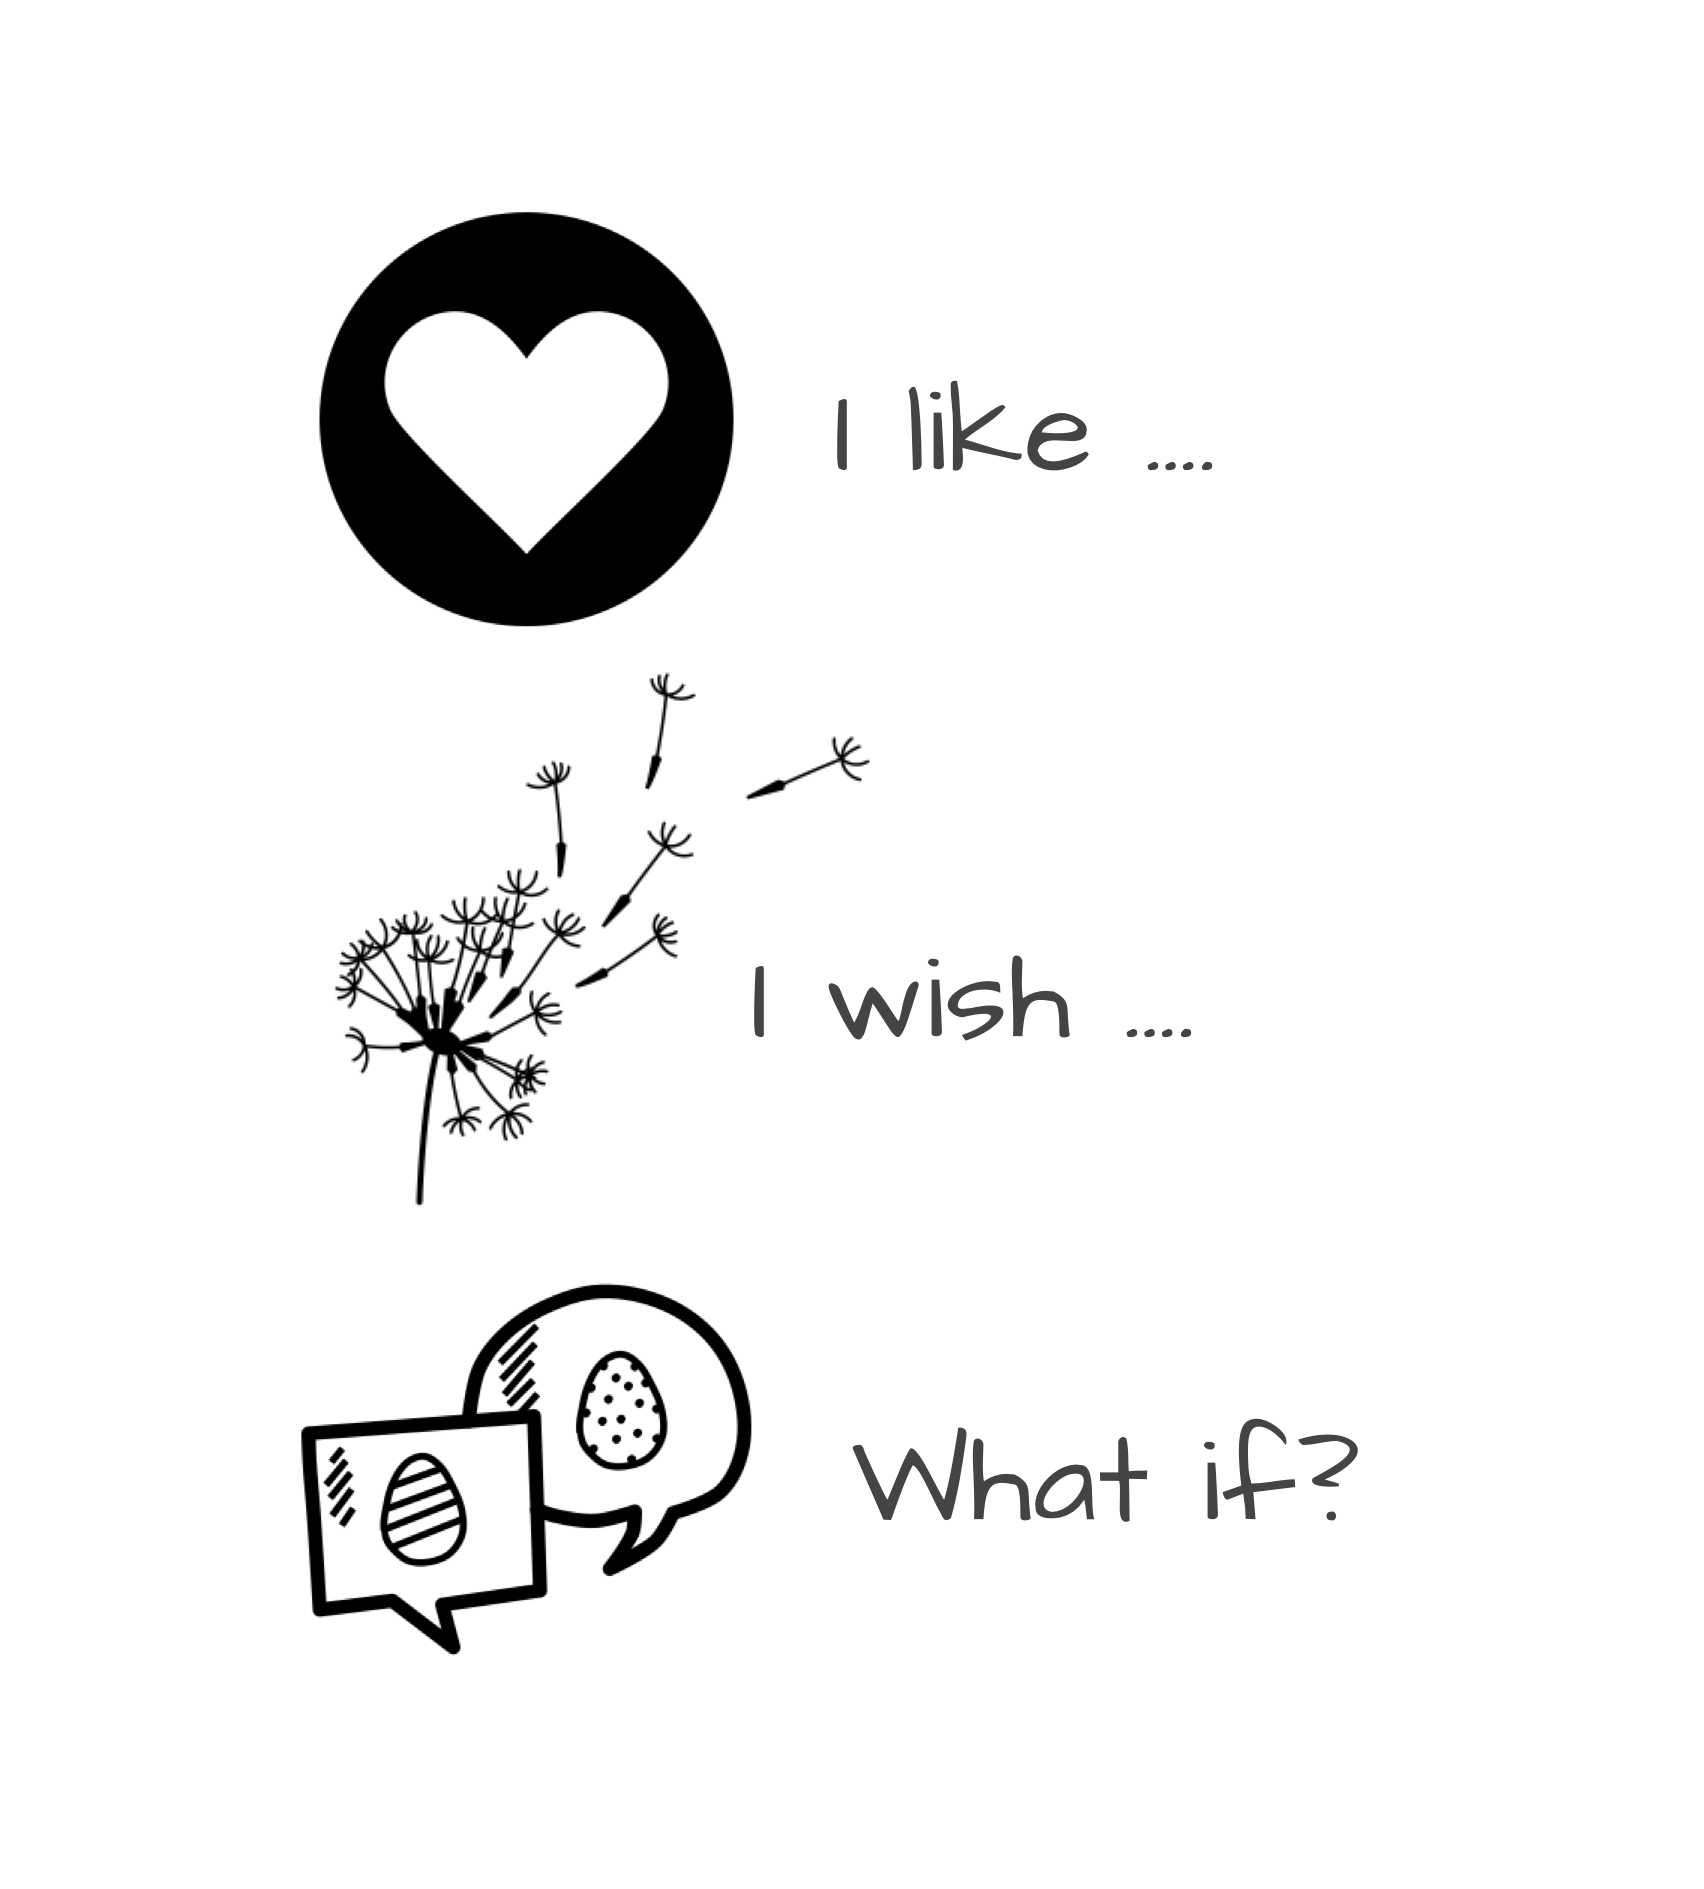 A heart next to the words I like, a dandelion next to the words I wish, and conversation bubbles next to the words What if